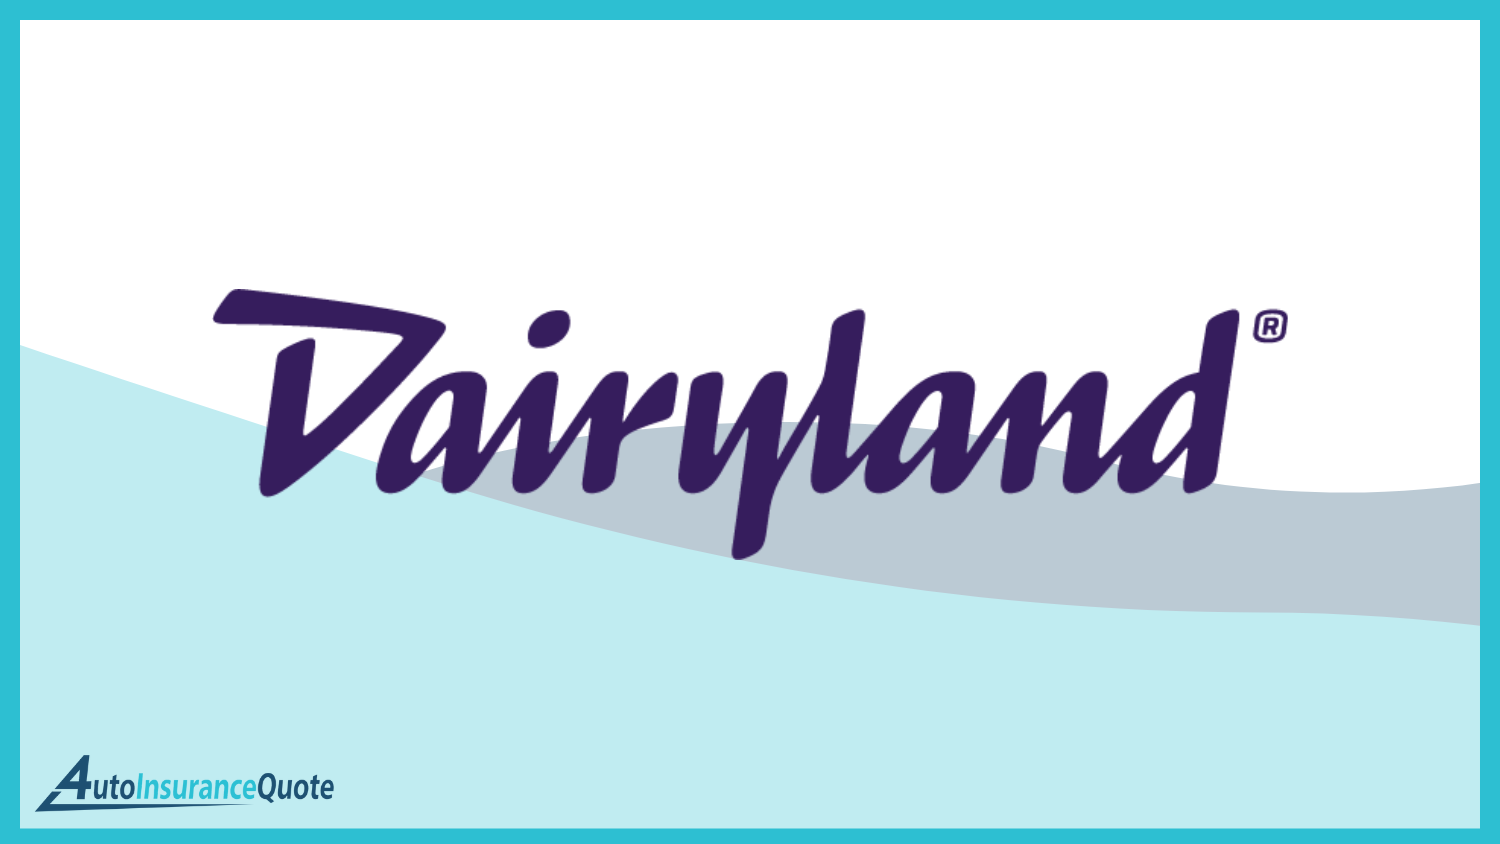 Dairyland: Best Auto Insurance for Non-US Citizens